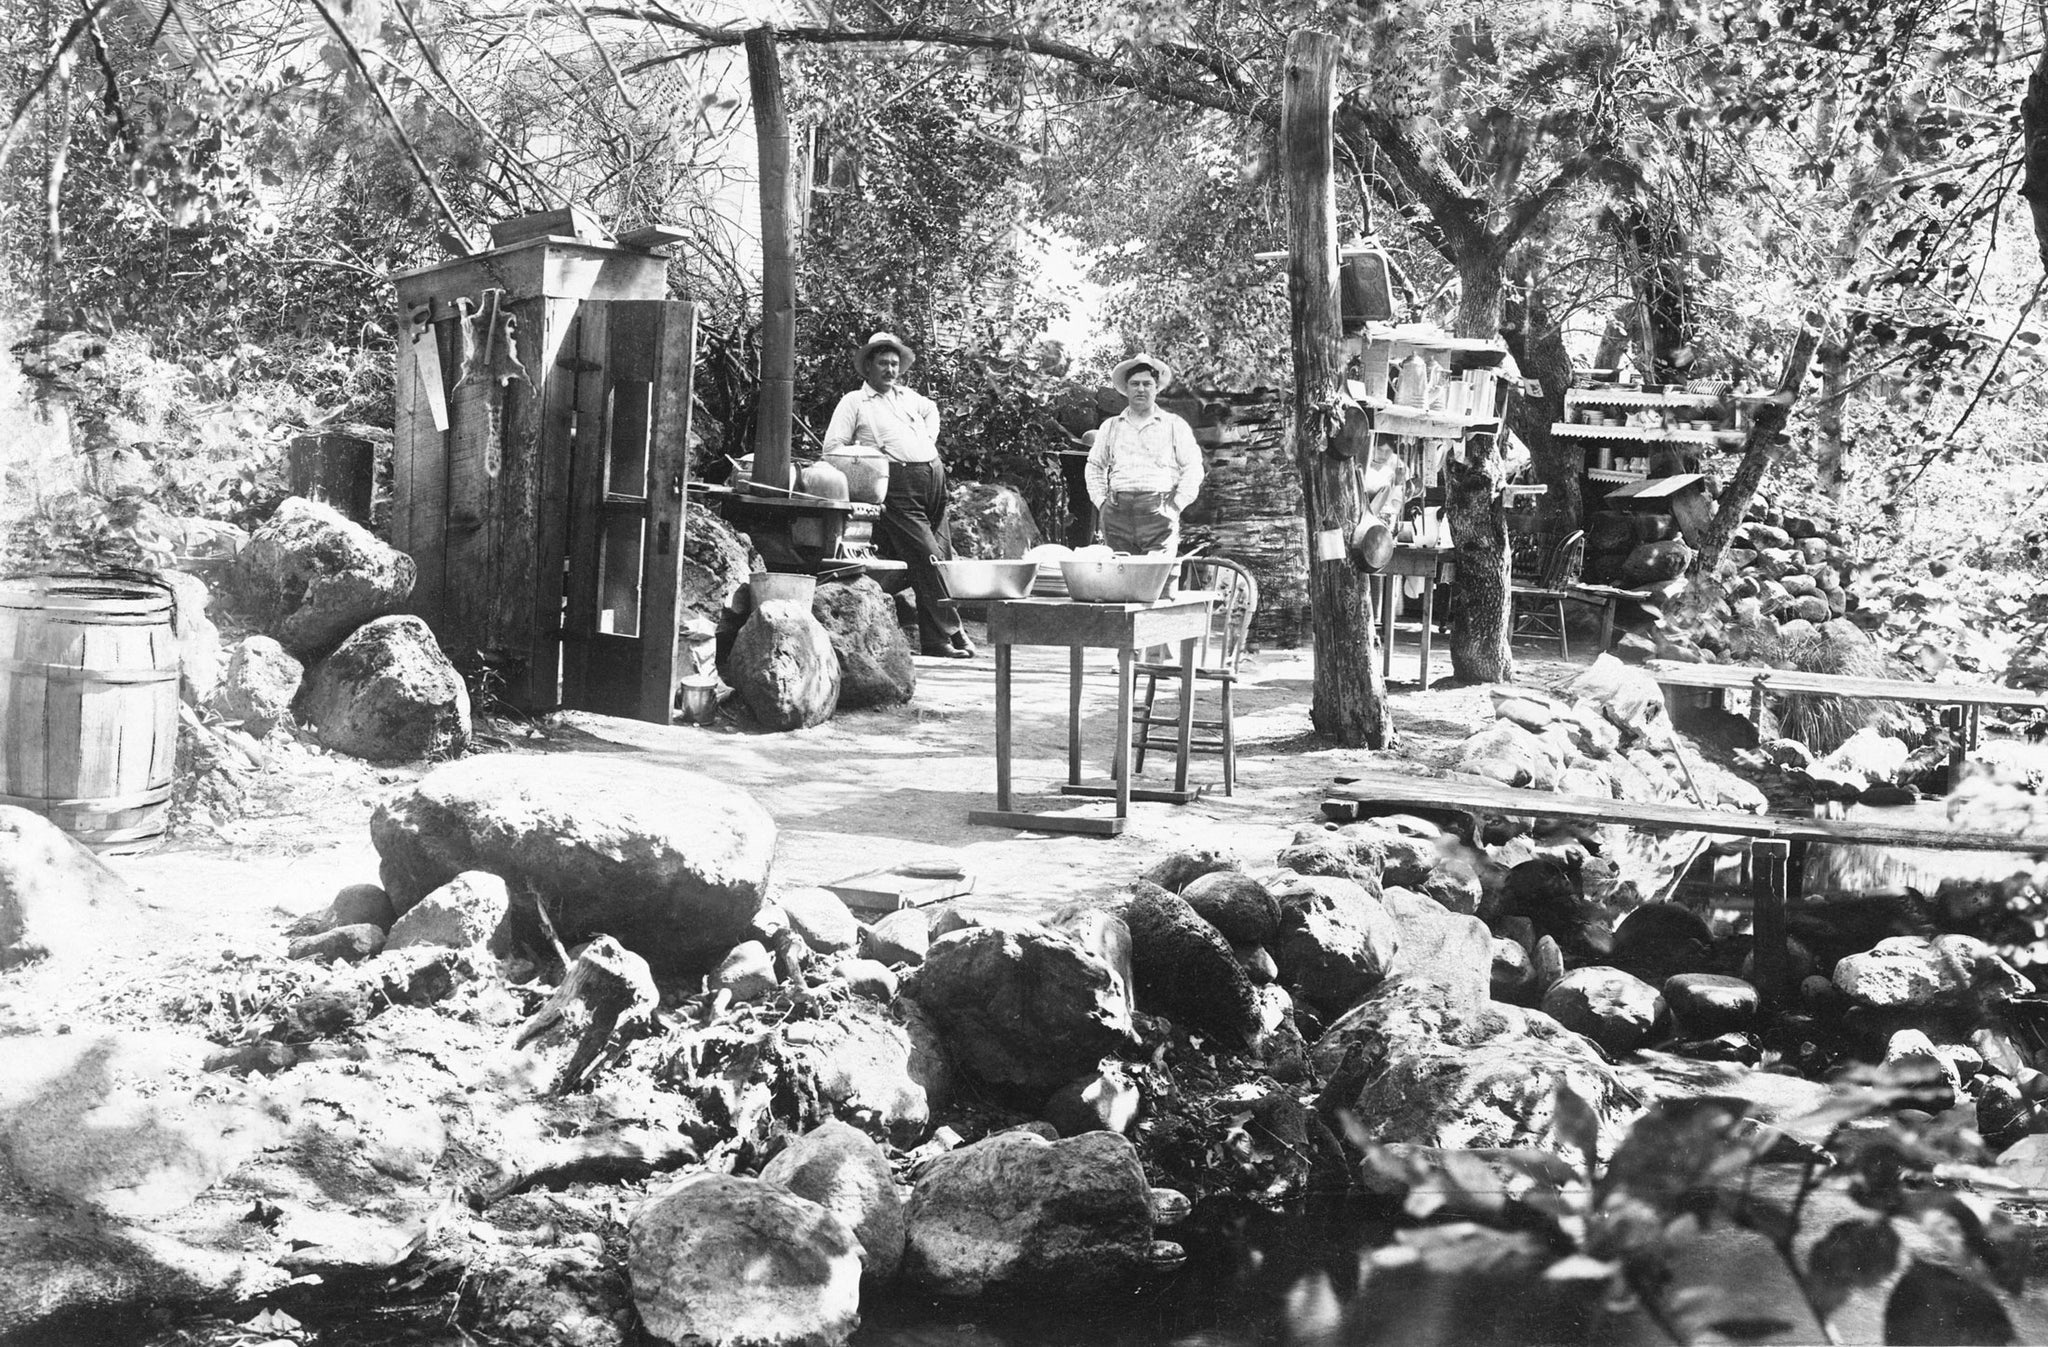 Campsite along Mud Creek in Richardson Springs resort, circa 1905. At Richardson Springs, guests had the option of staying in the Richardson Springs Hotel or camping. Later, cabins were also added to the resort. -- Courtesy Randy Taylor Collection